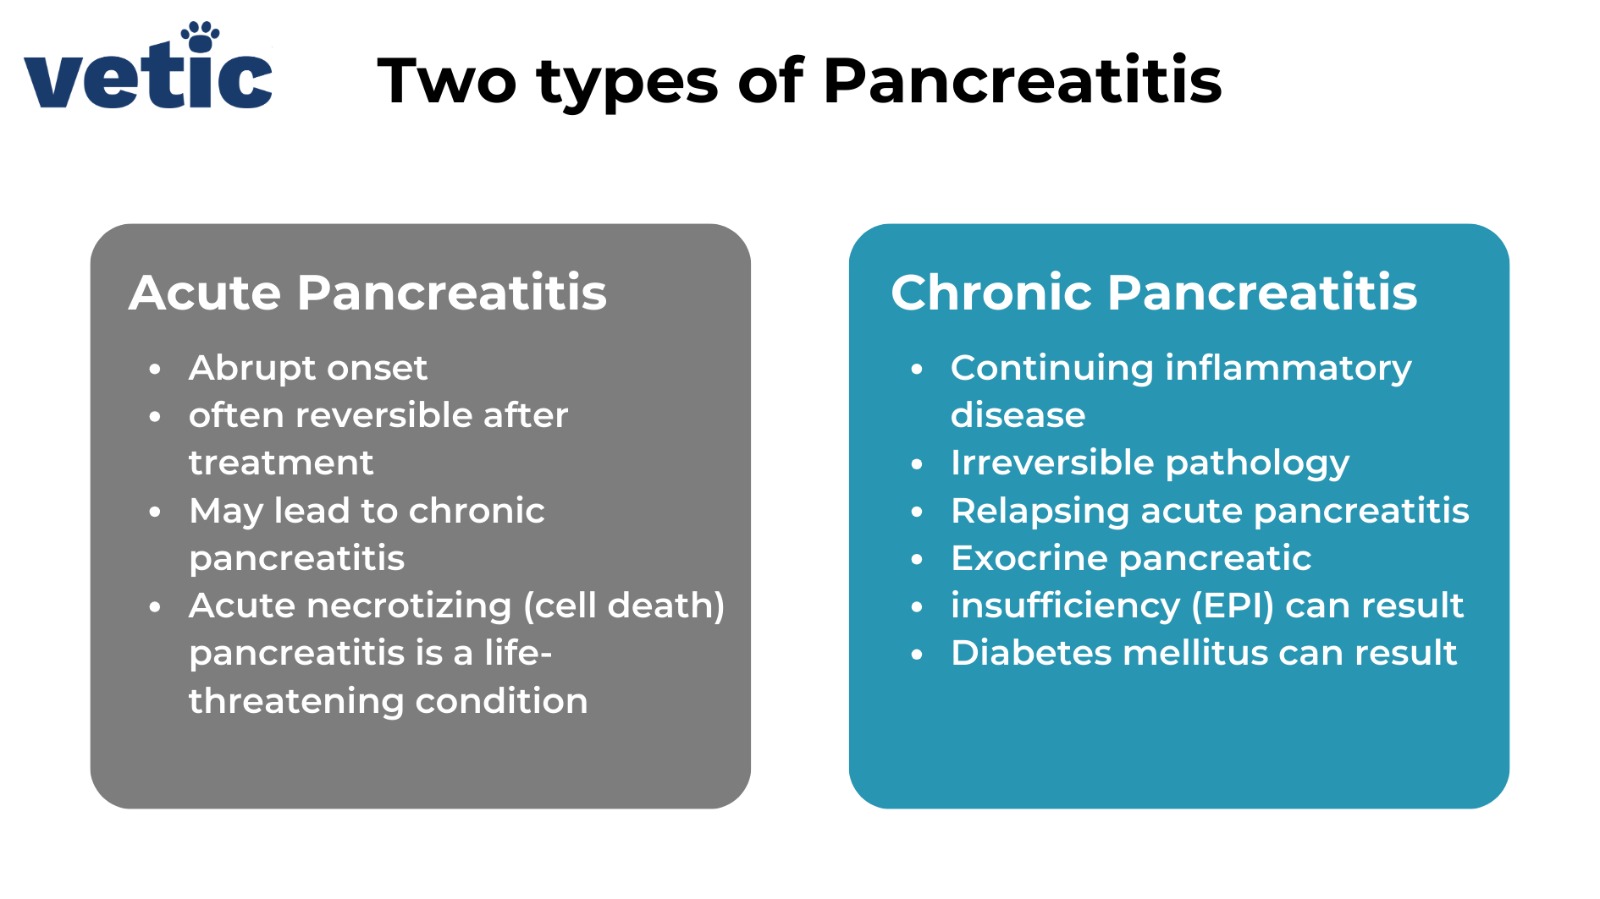 Infographic - Two types of pancreatitis in dogs. acute pancreatitis in dogs and chronic pancreatitis in dogs.